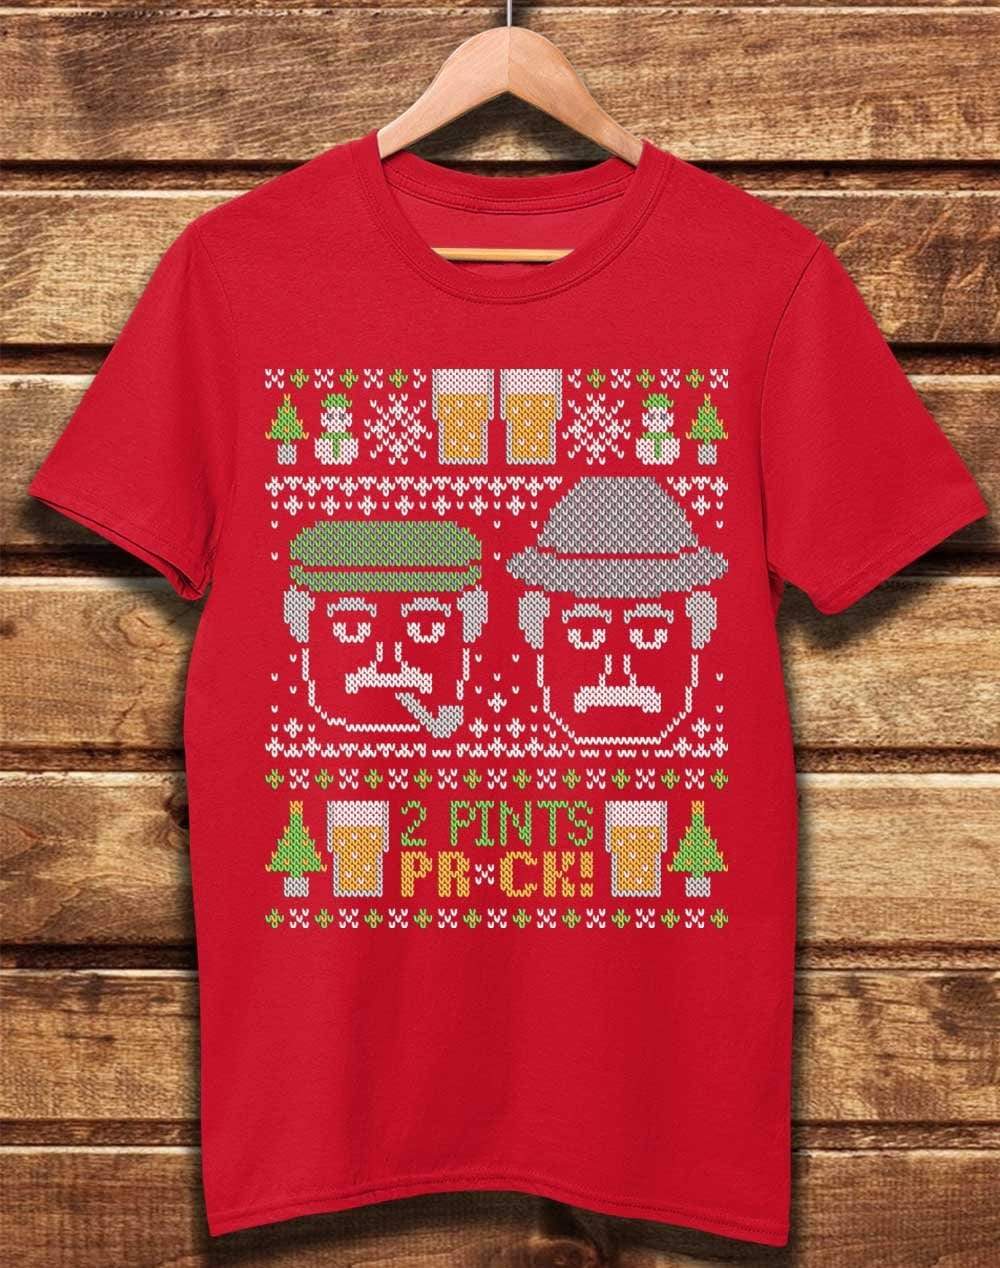 DELUXE Craiglang Christmas 2 Pints Knit Pattern Organic Cotton T-Shirt XS / Red  - Off World Tees